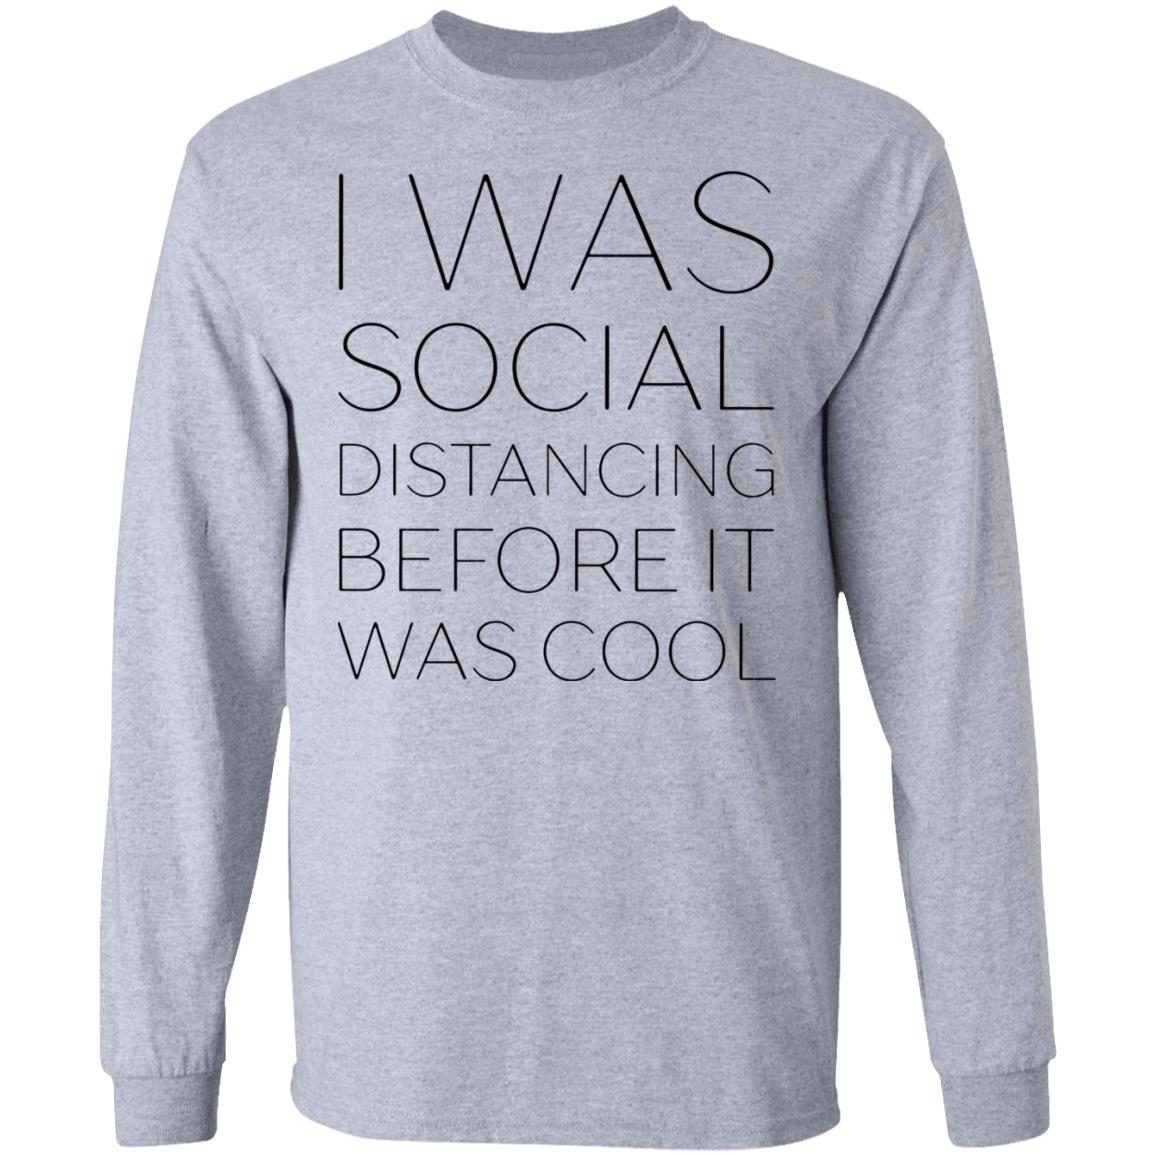 I Was Social Distancing Before It Was Cool shirt 2